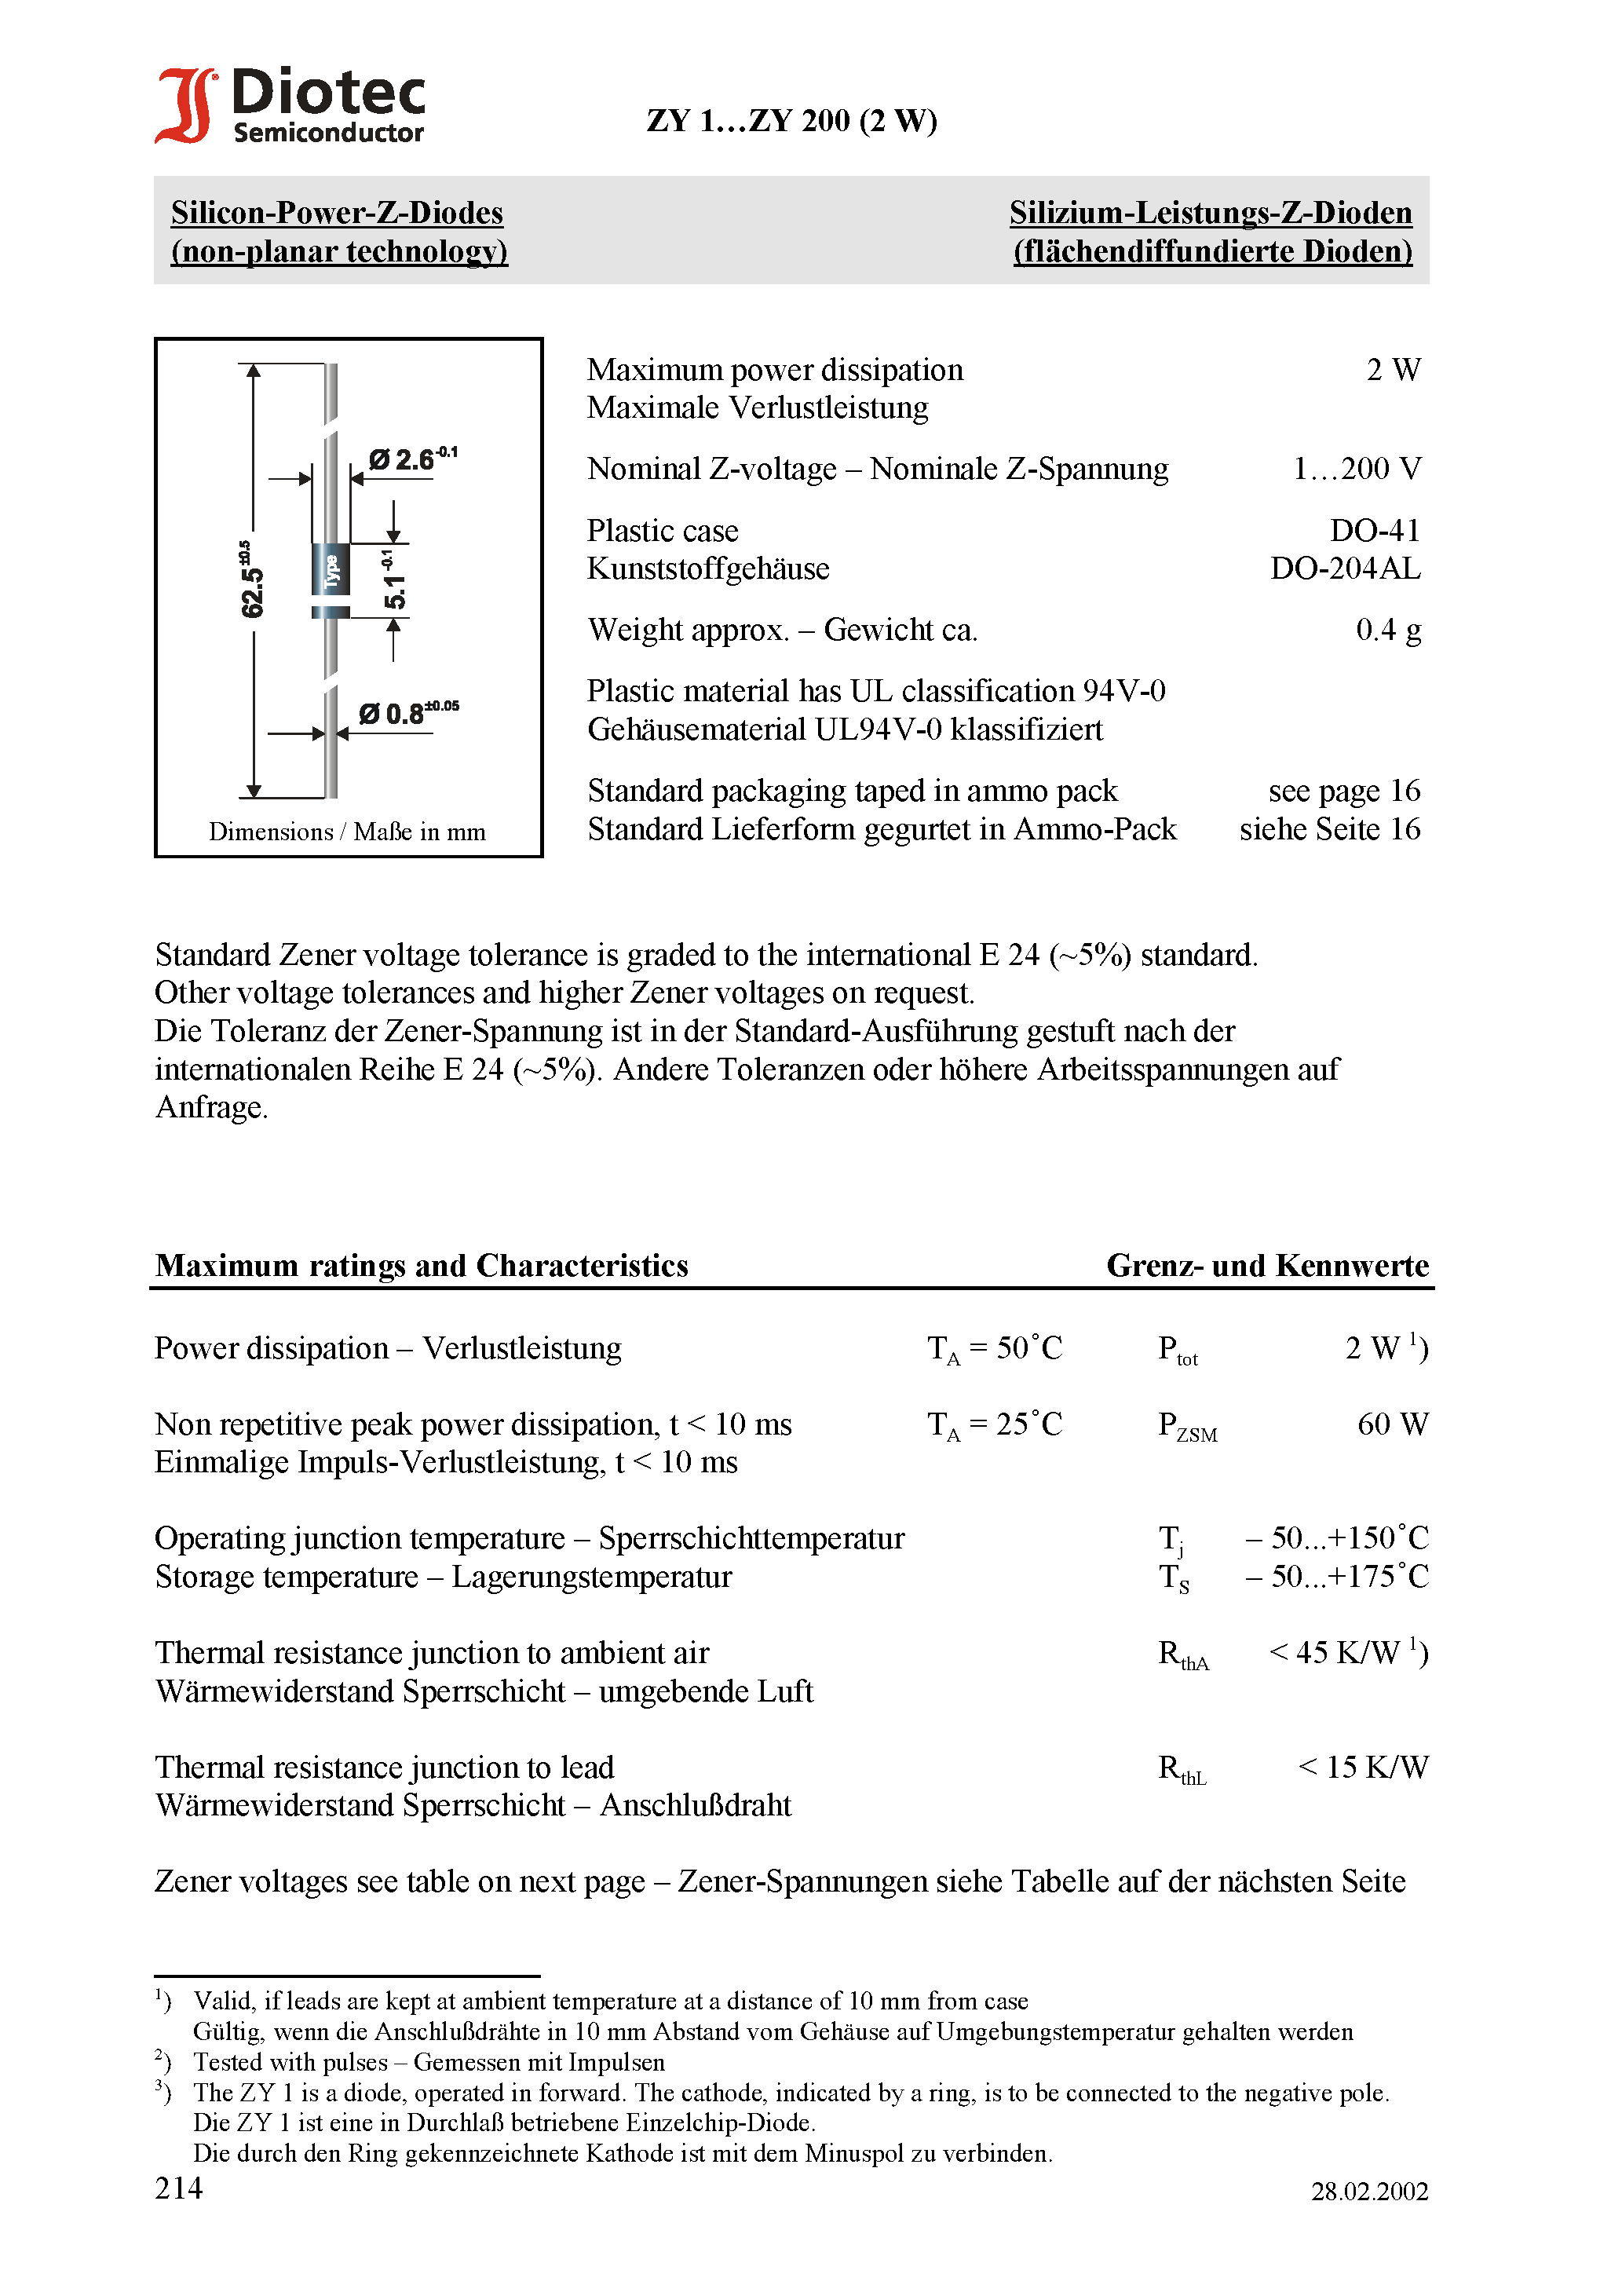 Datasheet ZY4.3 - Silicon-Power-Z-Diodes (non-planar technology) page 1